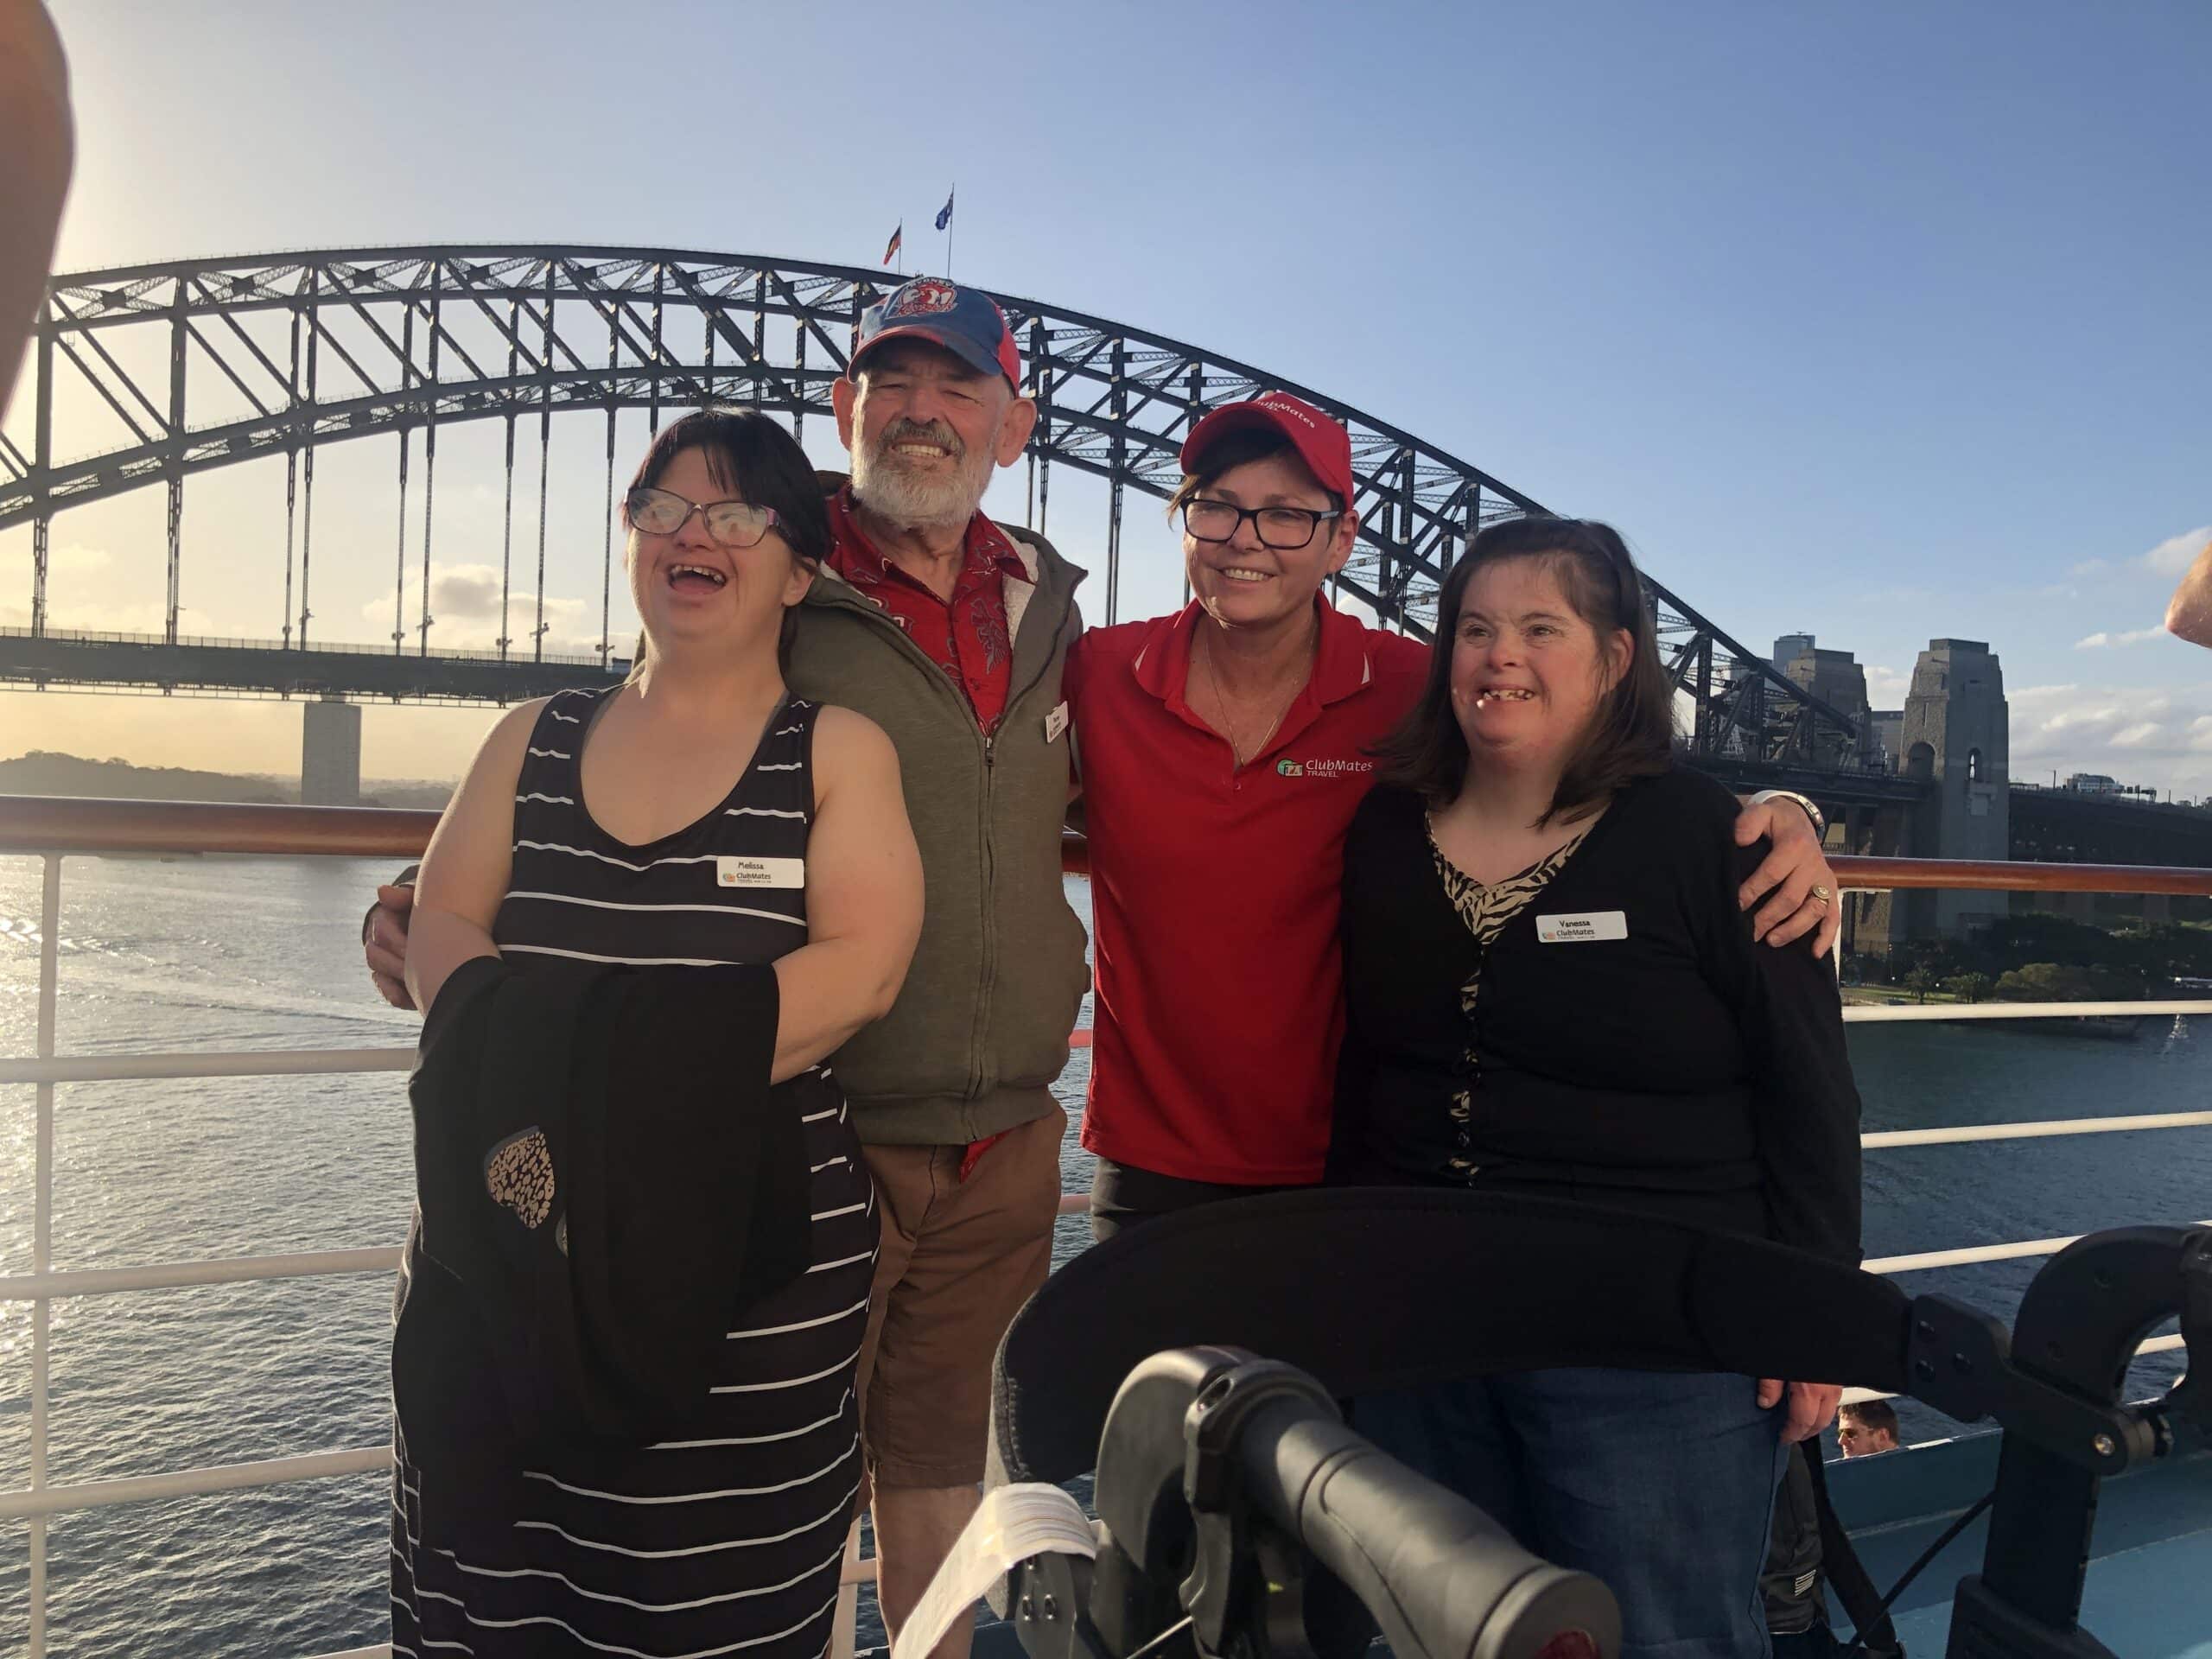 3 ClubMates passengers with their support worker looking happy in front of the Sydney Harbour Bridge